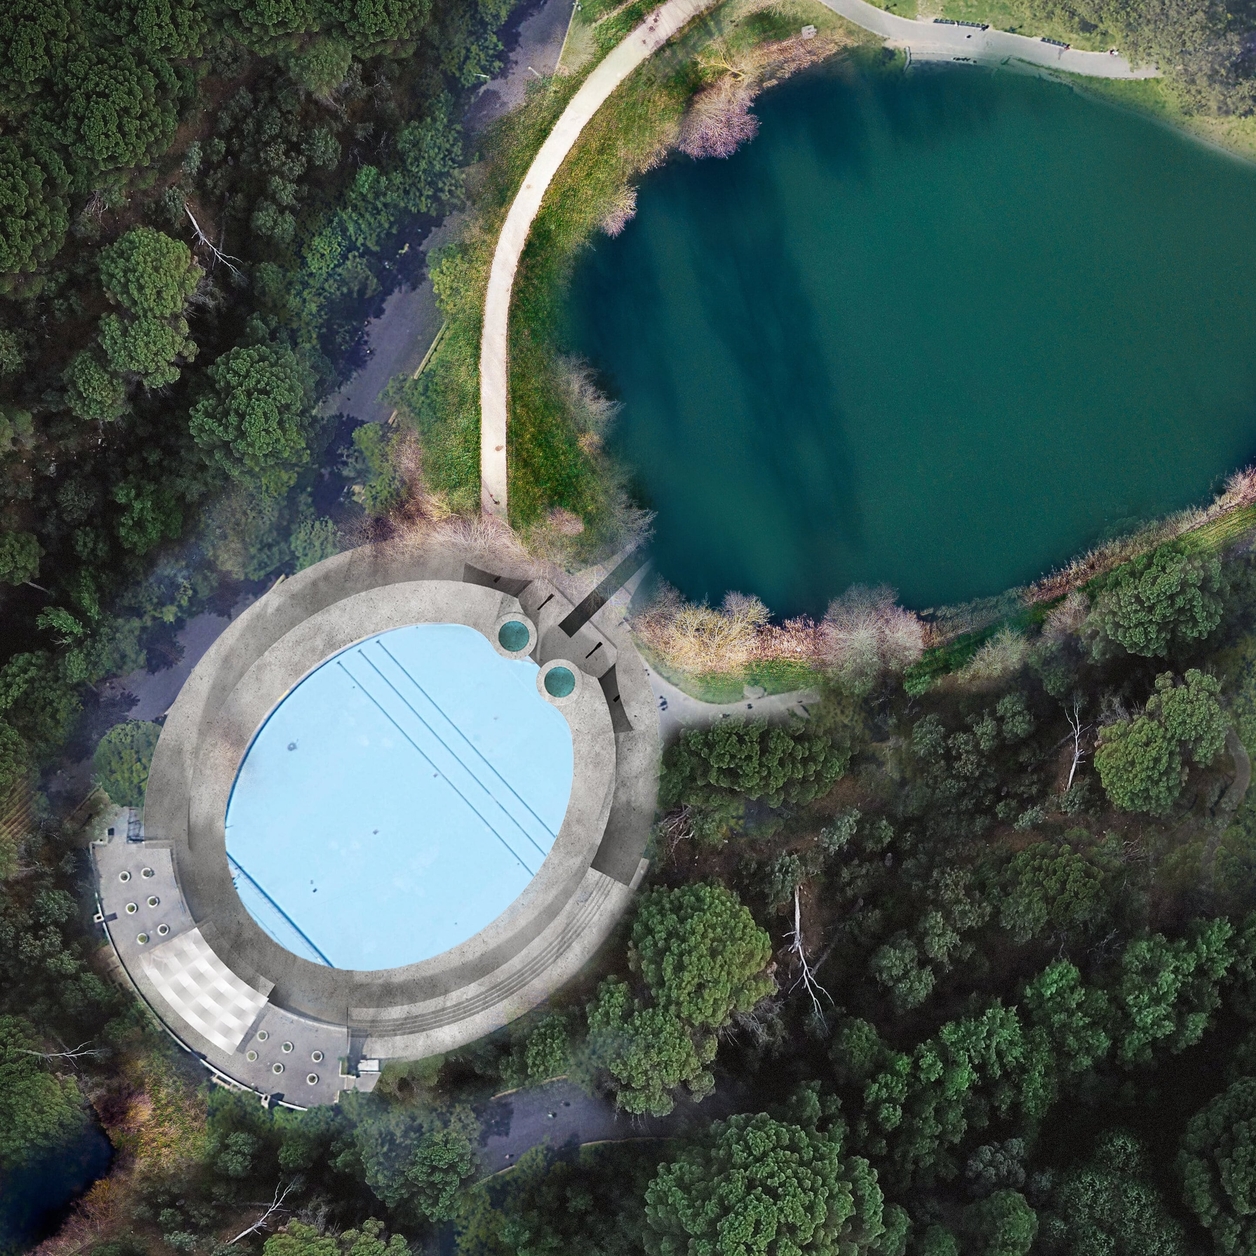 Arial view of structure and nearby lake